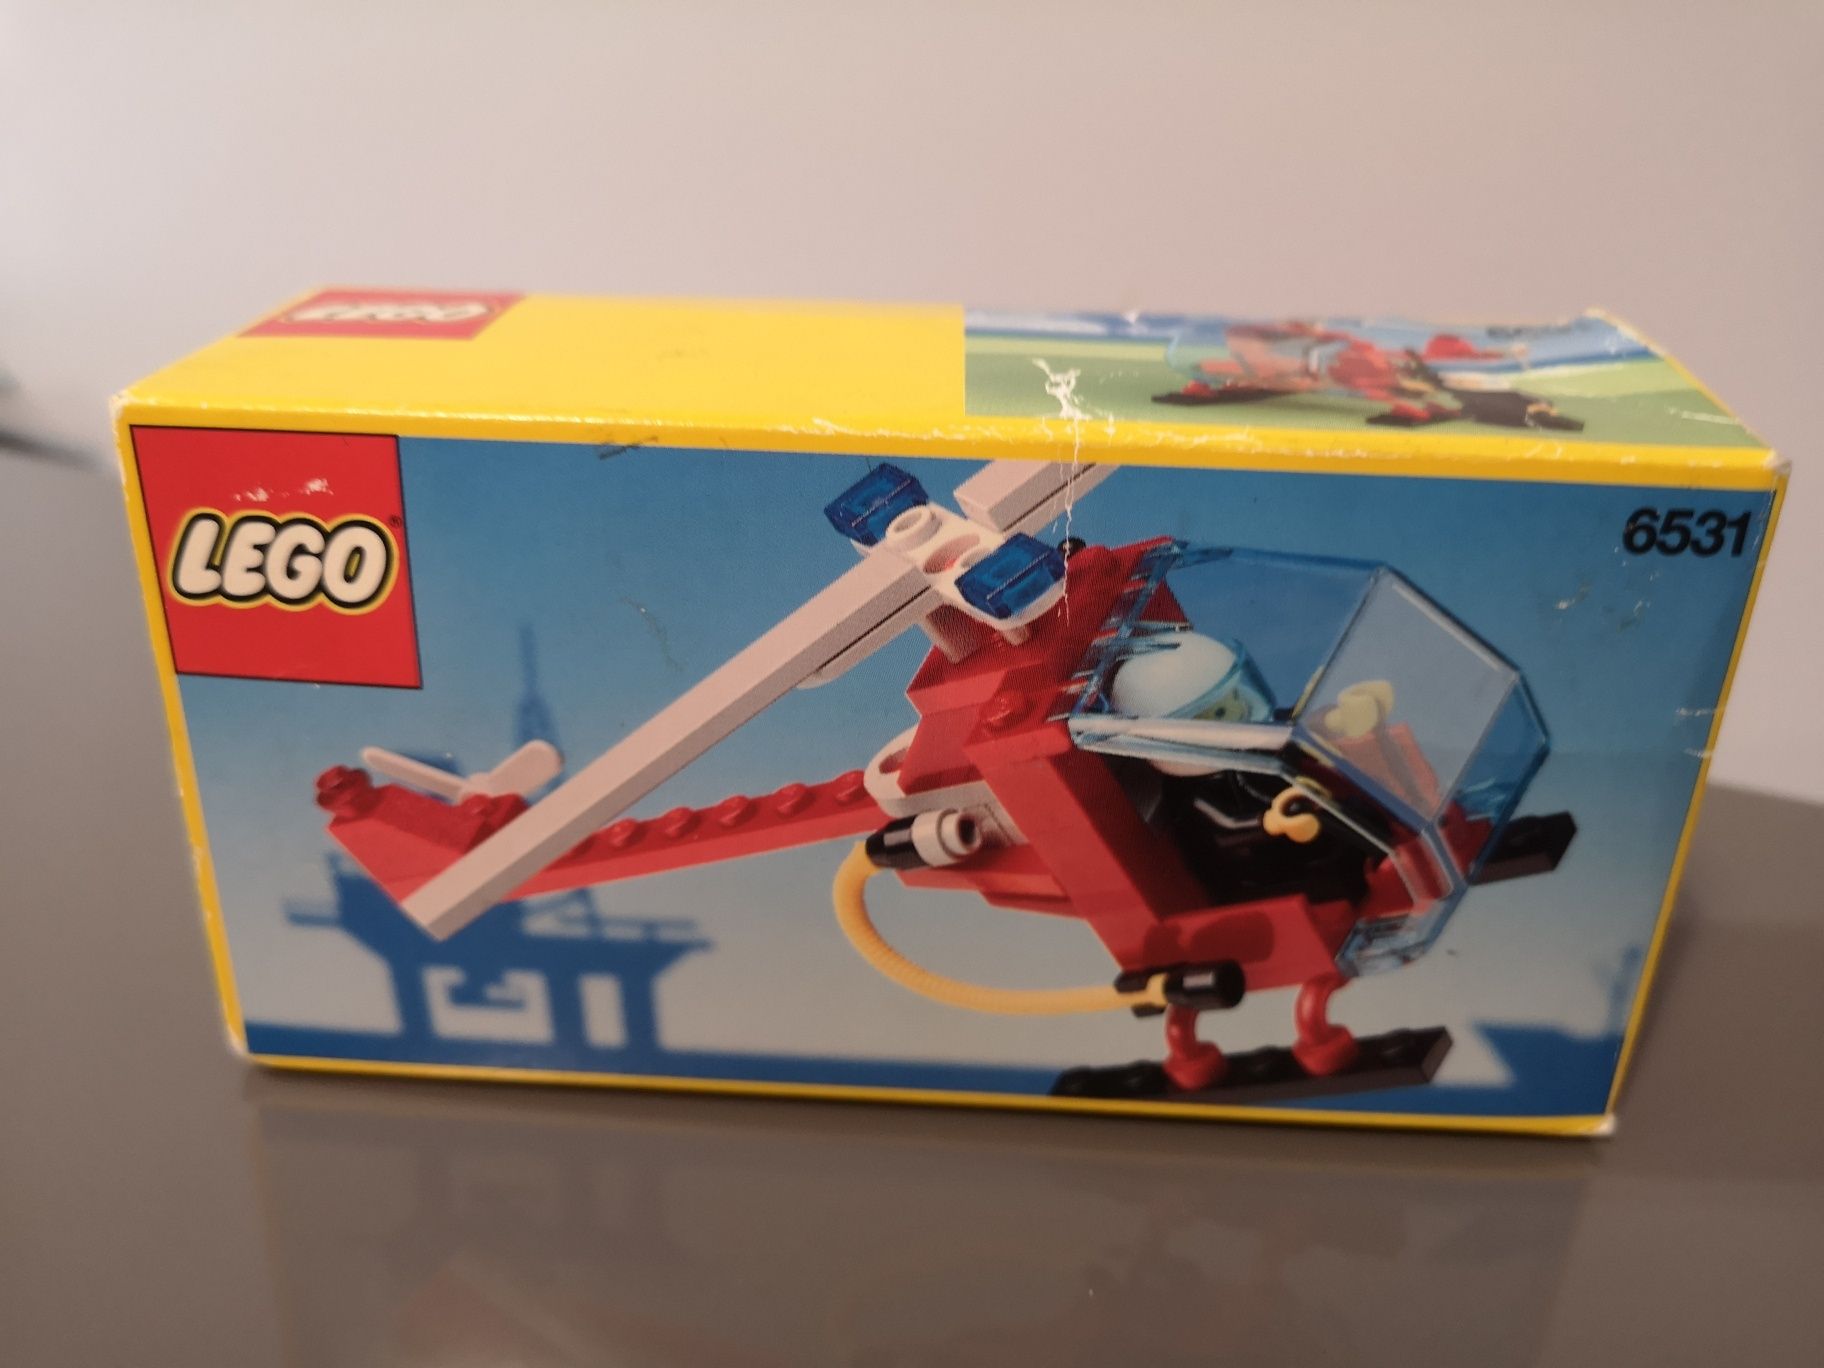 Lego Flame Chaser 6531